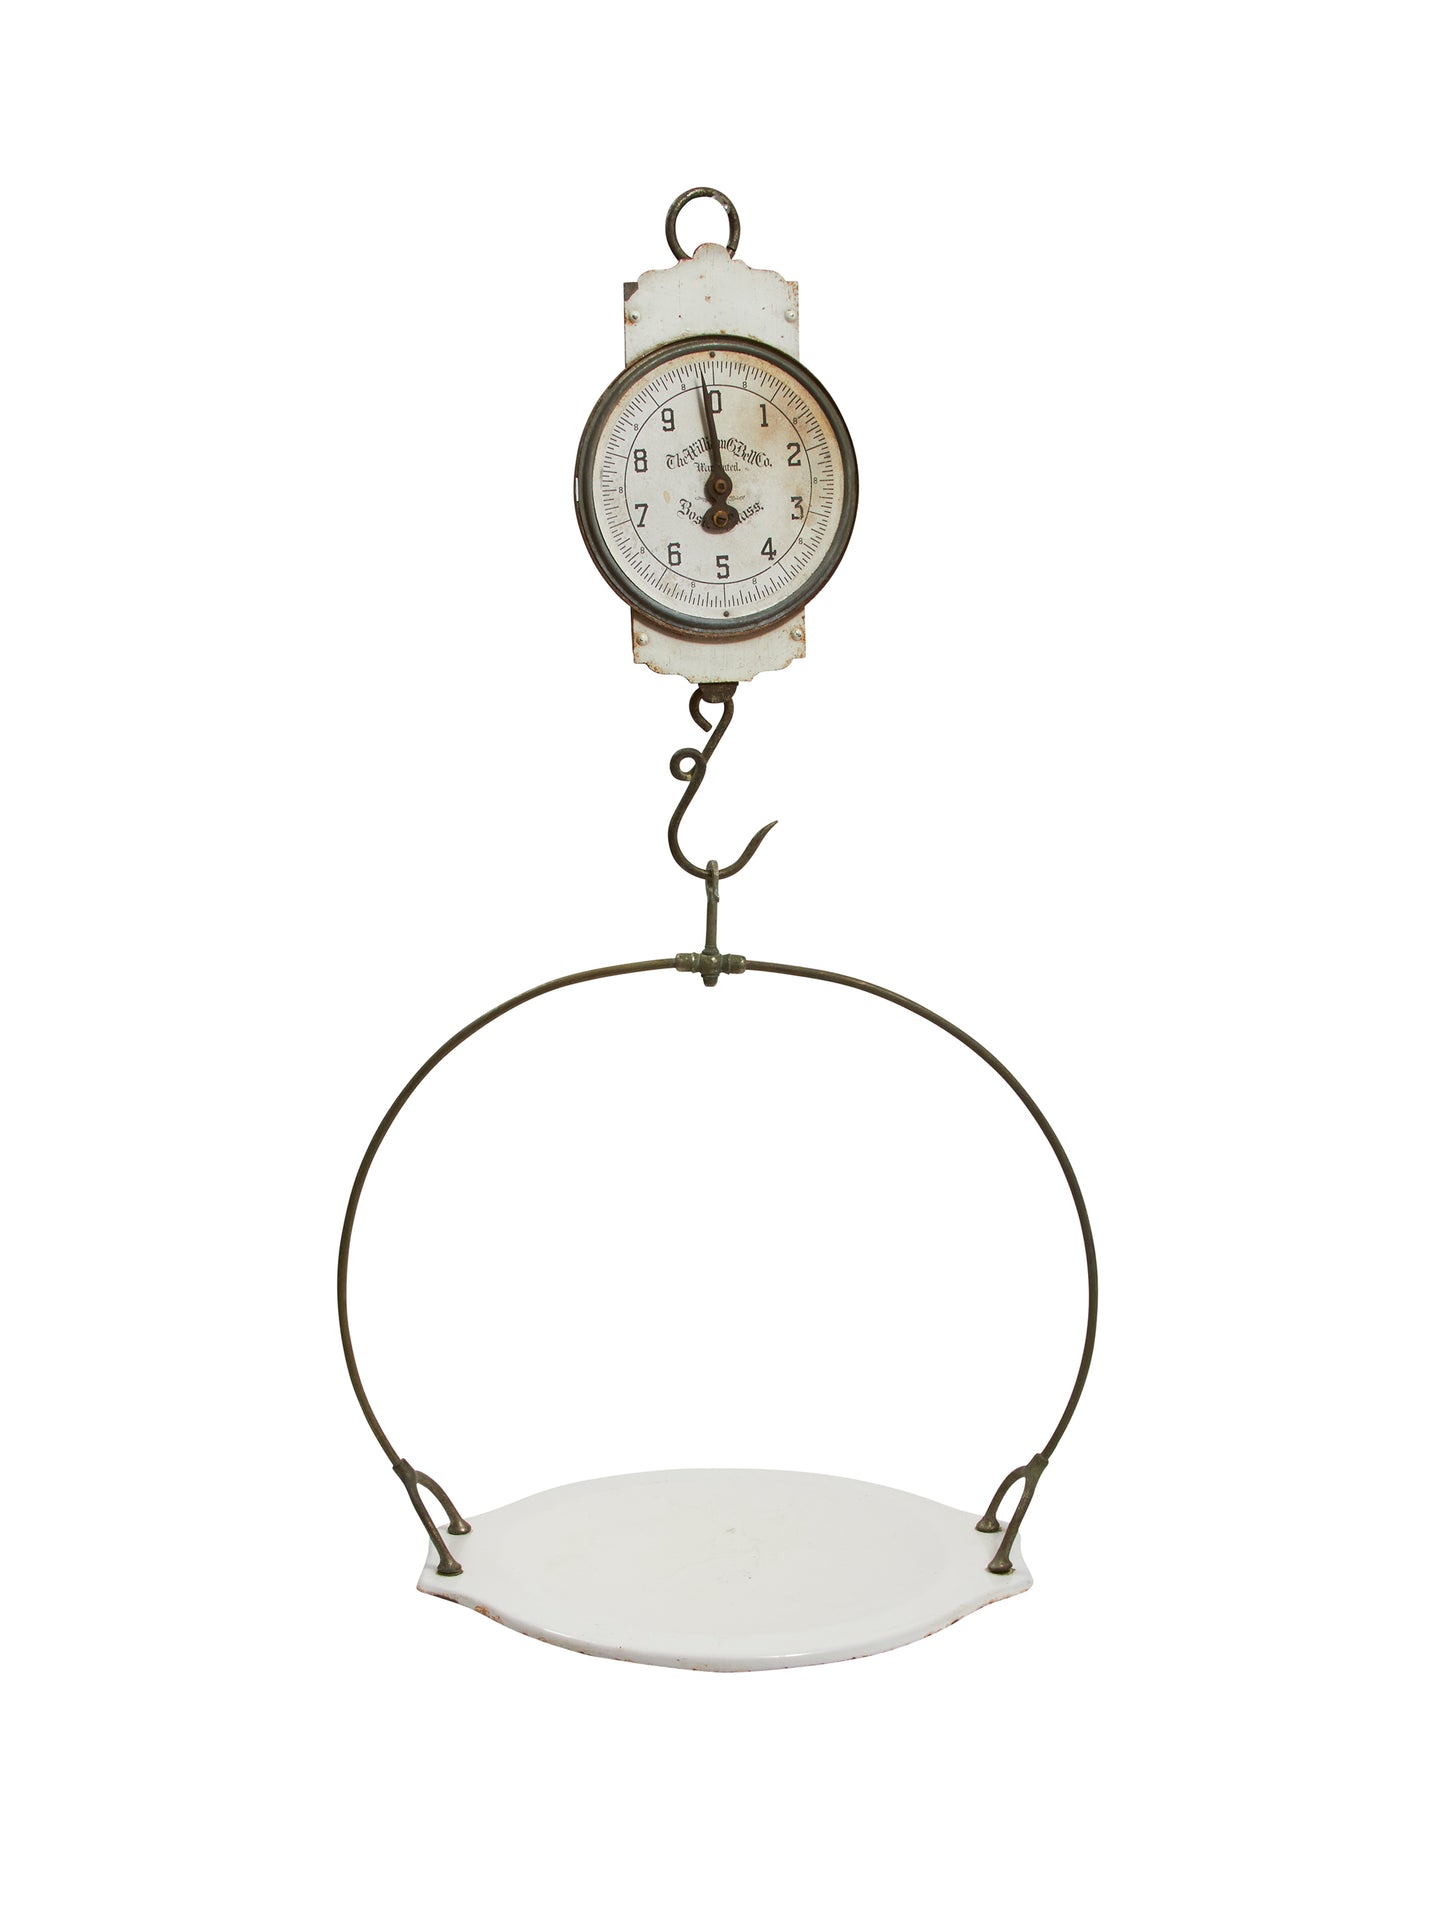 Shop the Vintage 1930s William G. Bell Co. Hanging Scale at Weston